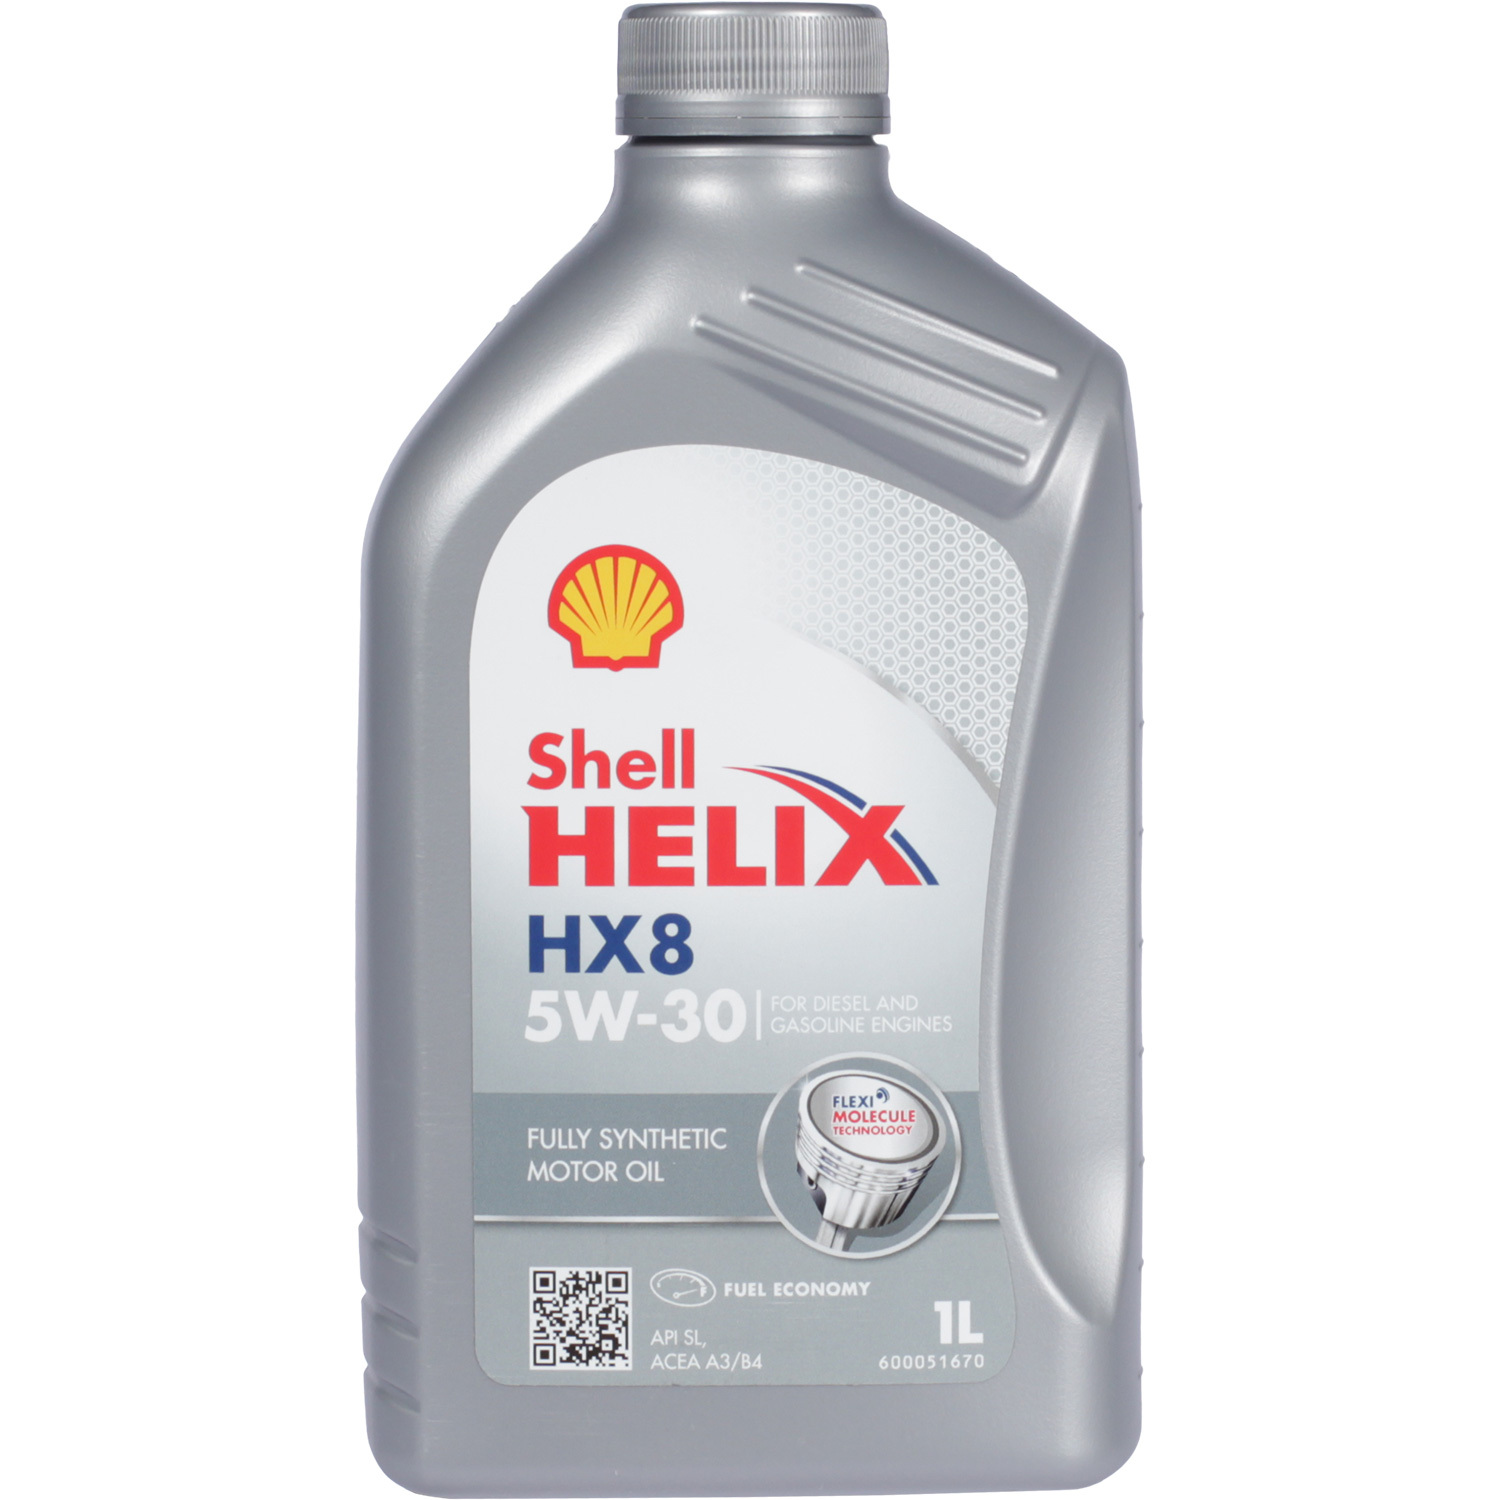 Shell Моторное масло Shell Helix HX8 5W-30, 1 л shell моторное масло shell helix hx8 5w 30 1 л